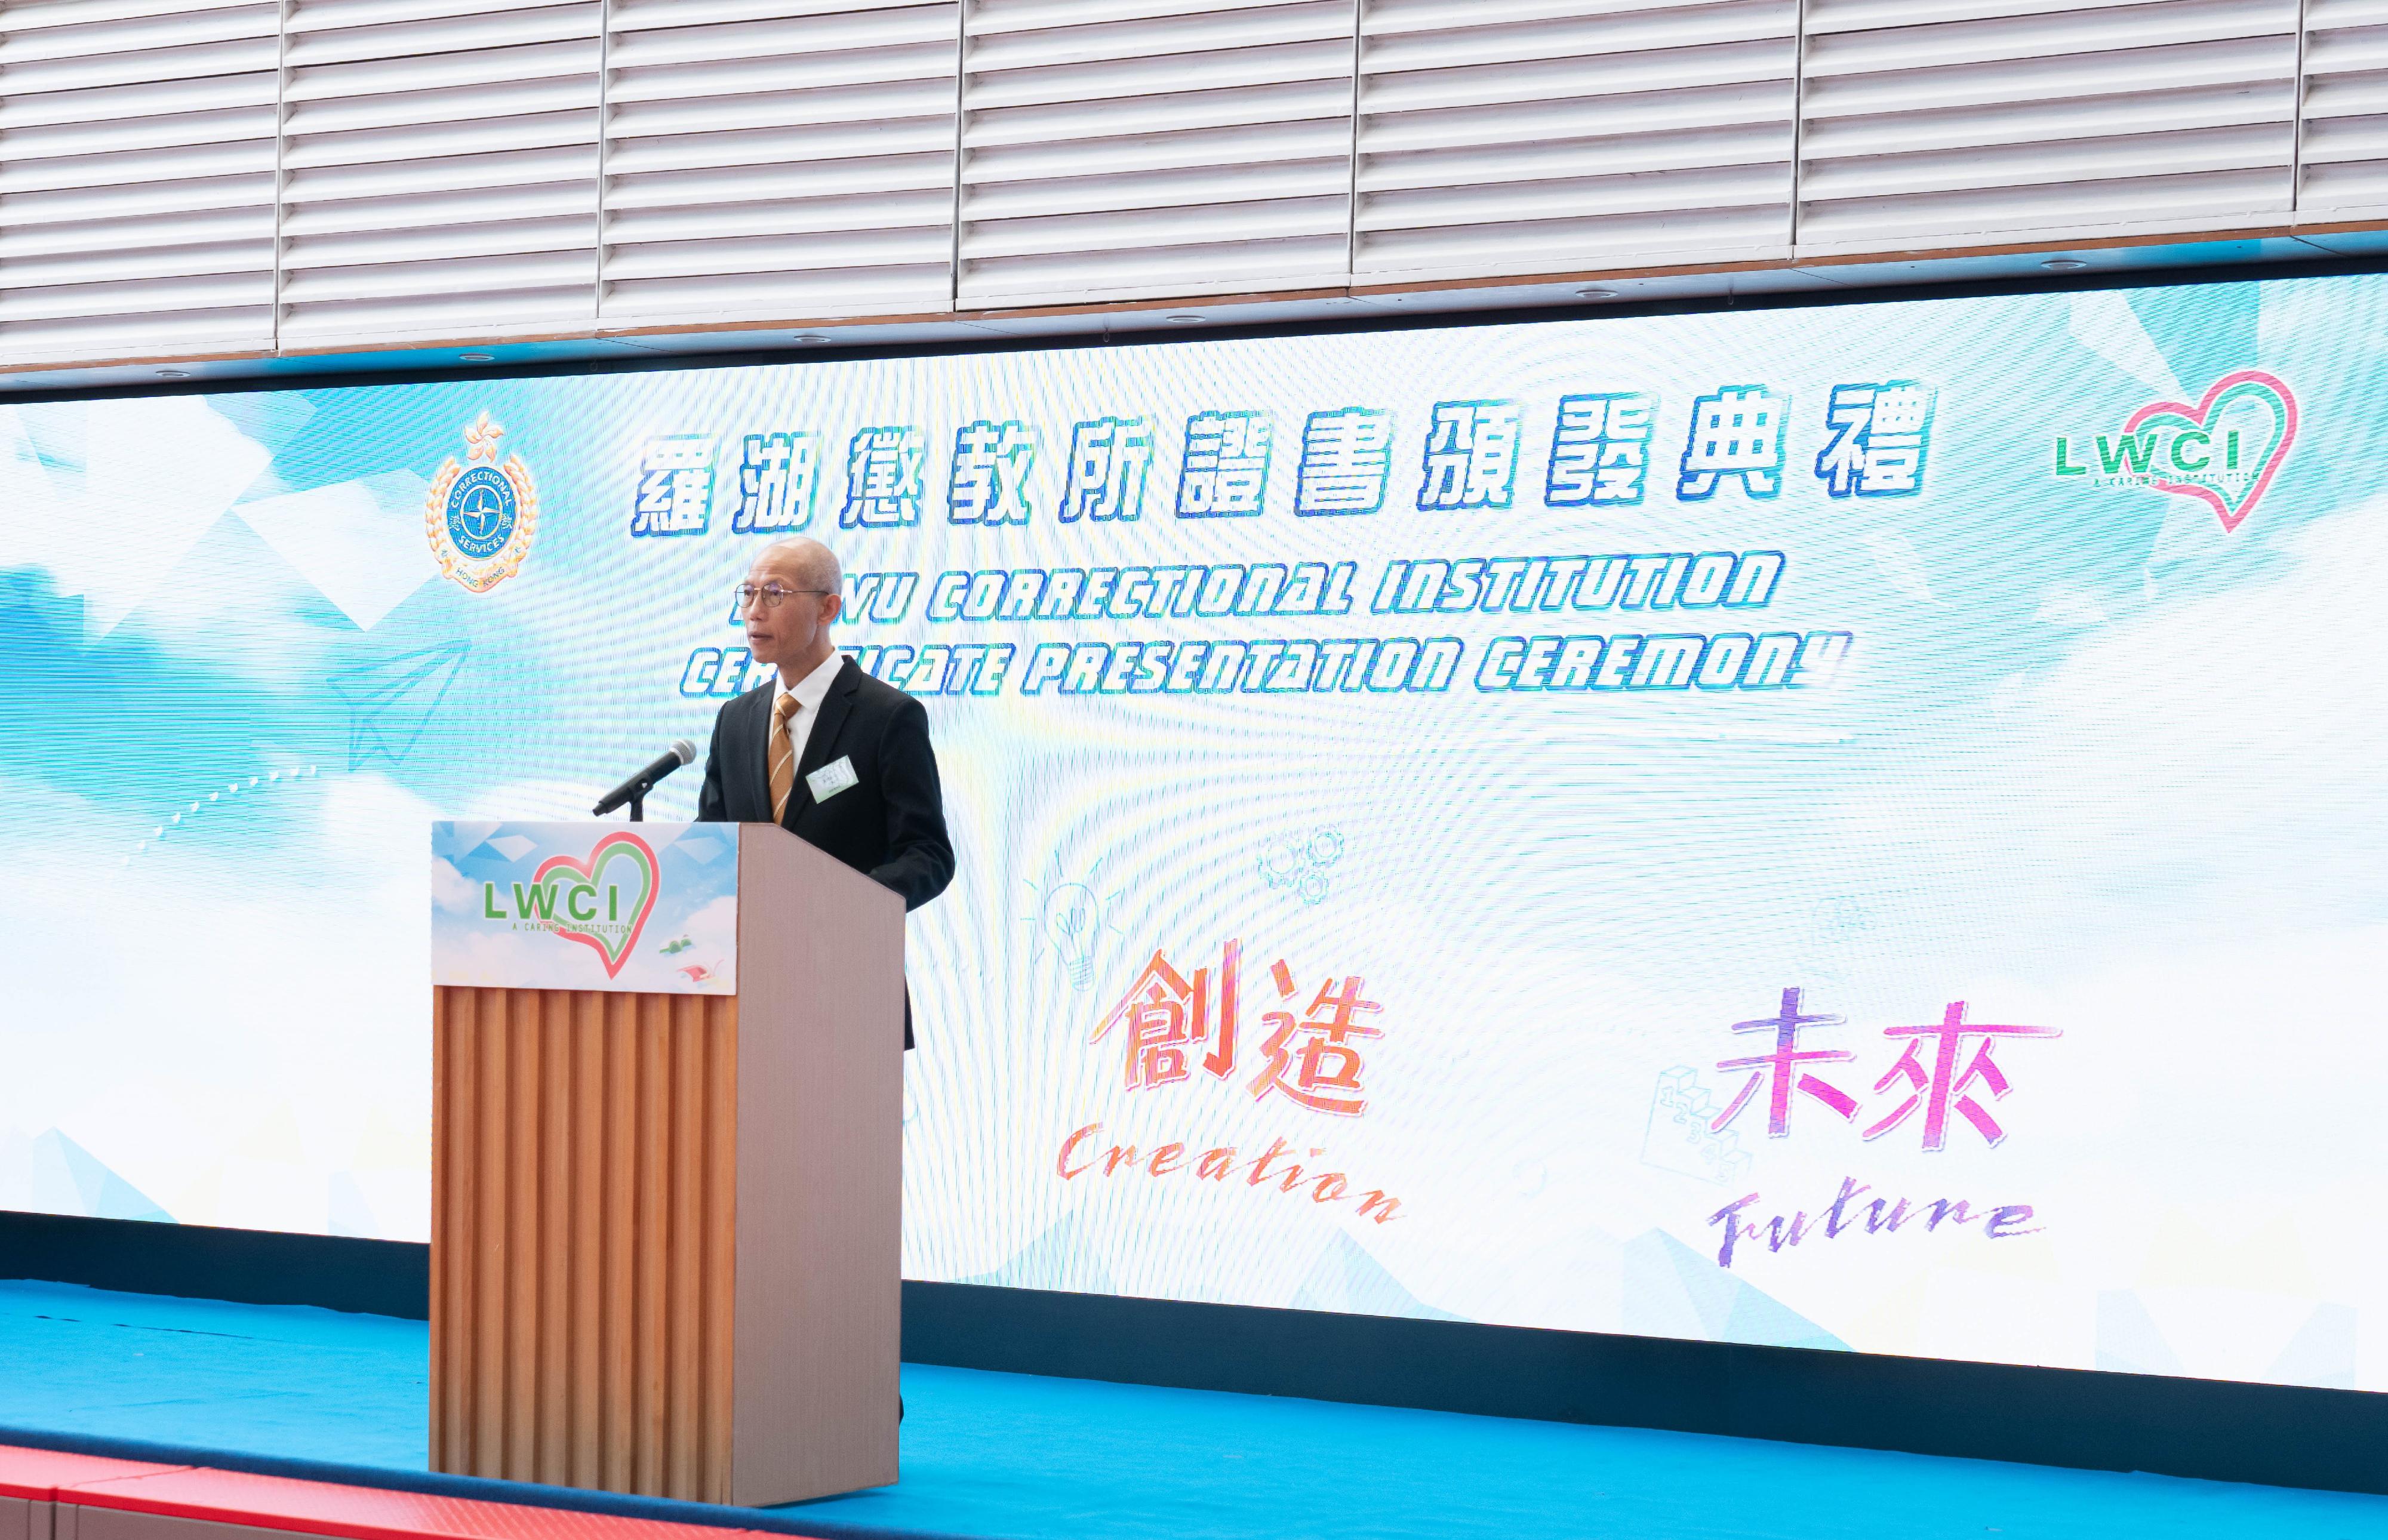 Persons in custody at Lo Wu Correctional Institution of the Correctional Services Department were presented with certificates at a ceremony today (March 20) in recognition of their continuous efforts in pursuing further studies. Photo shows the Chairman of Tung Sin Tan, Mr Ha Tak-kin, giving a speech at the ceremony.